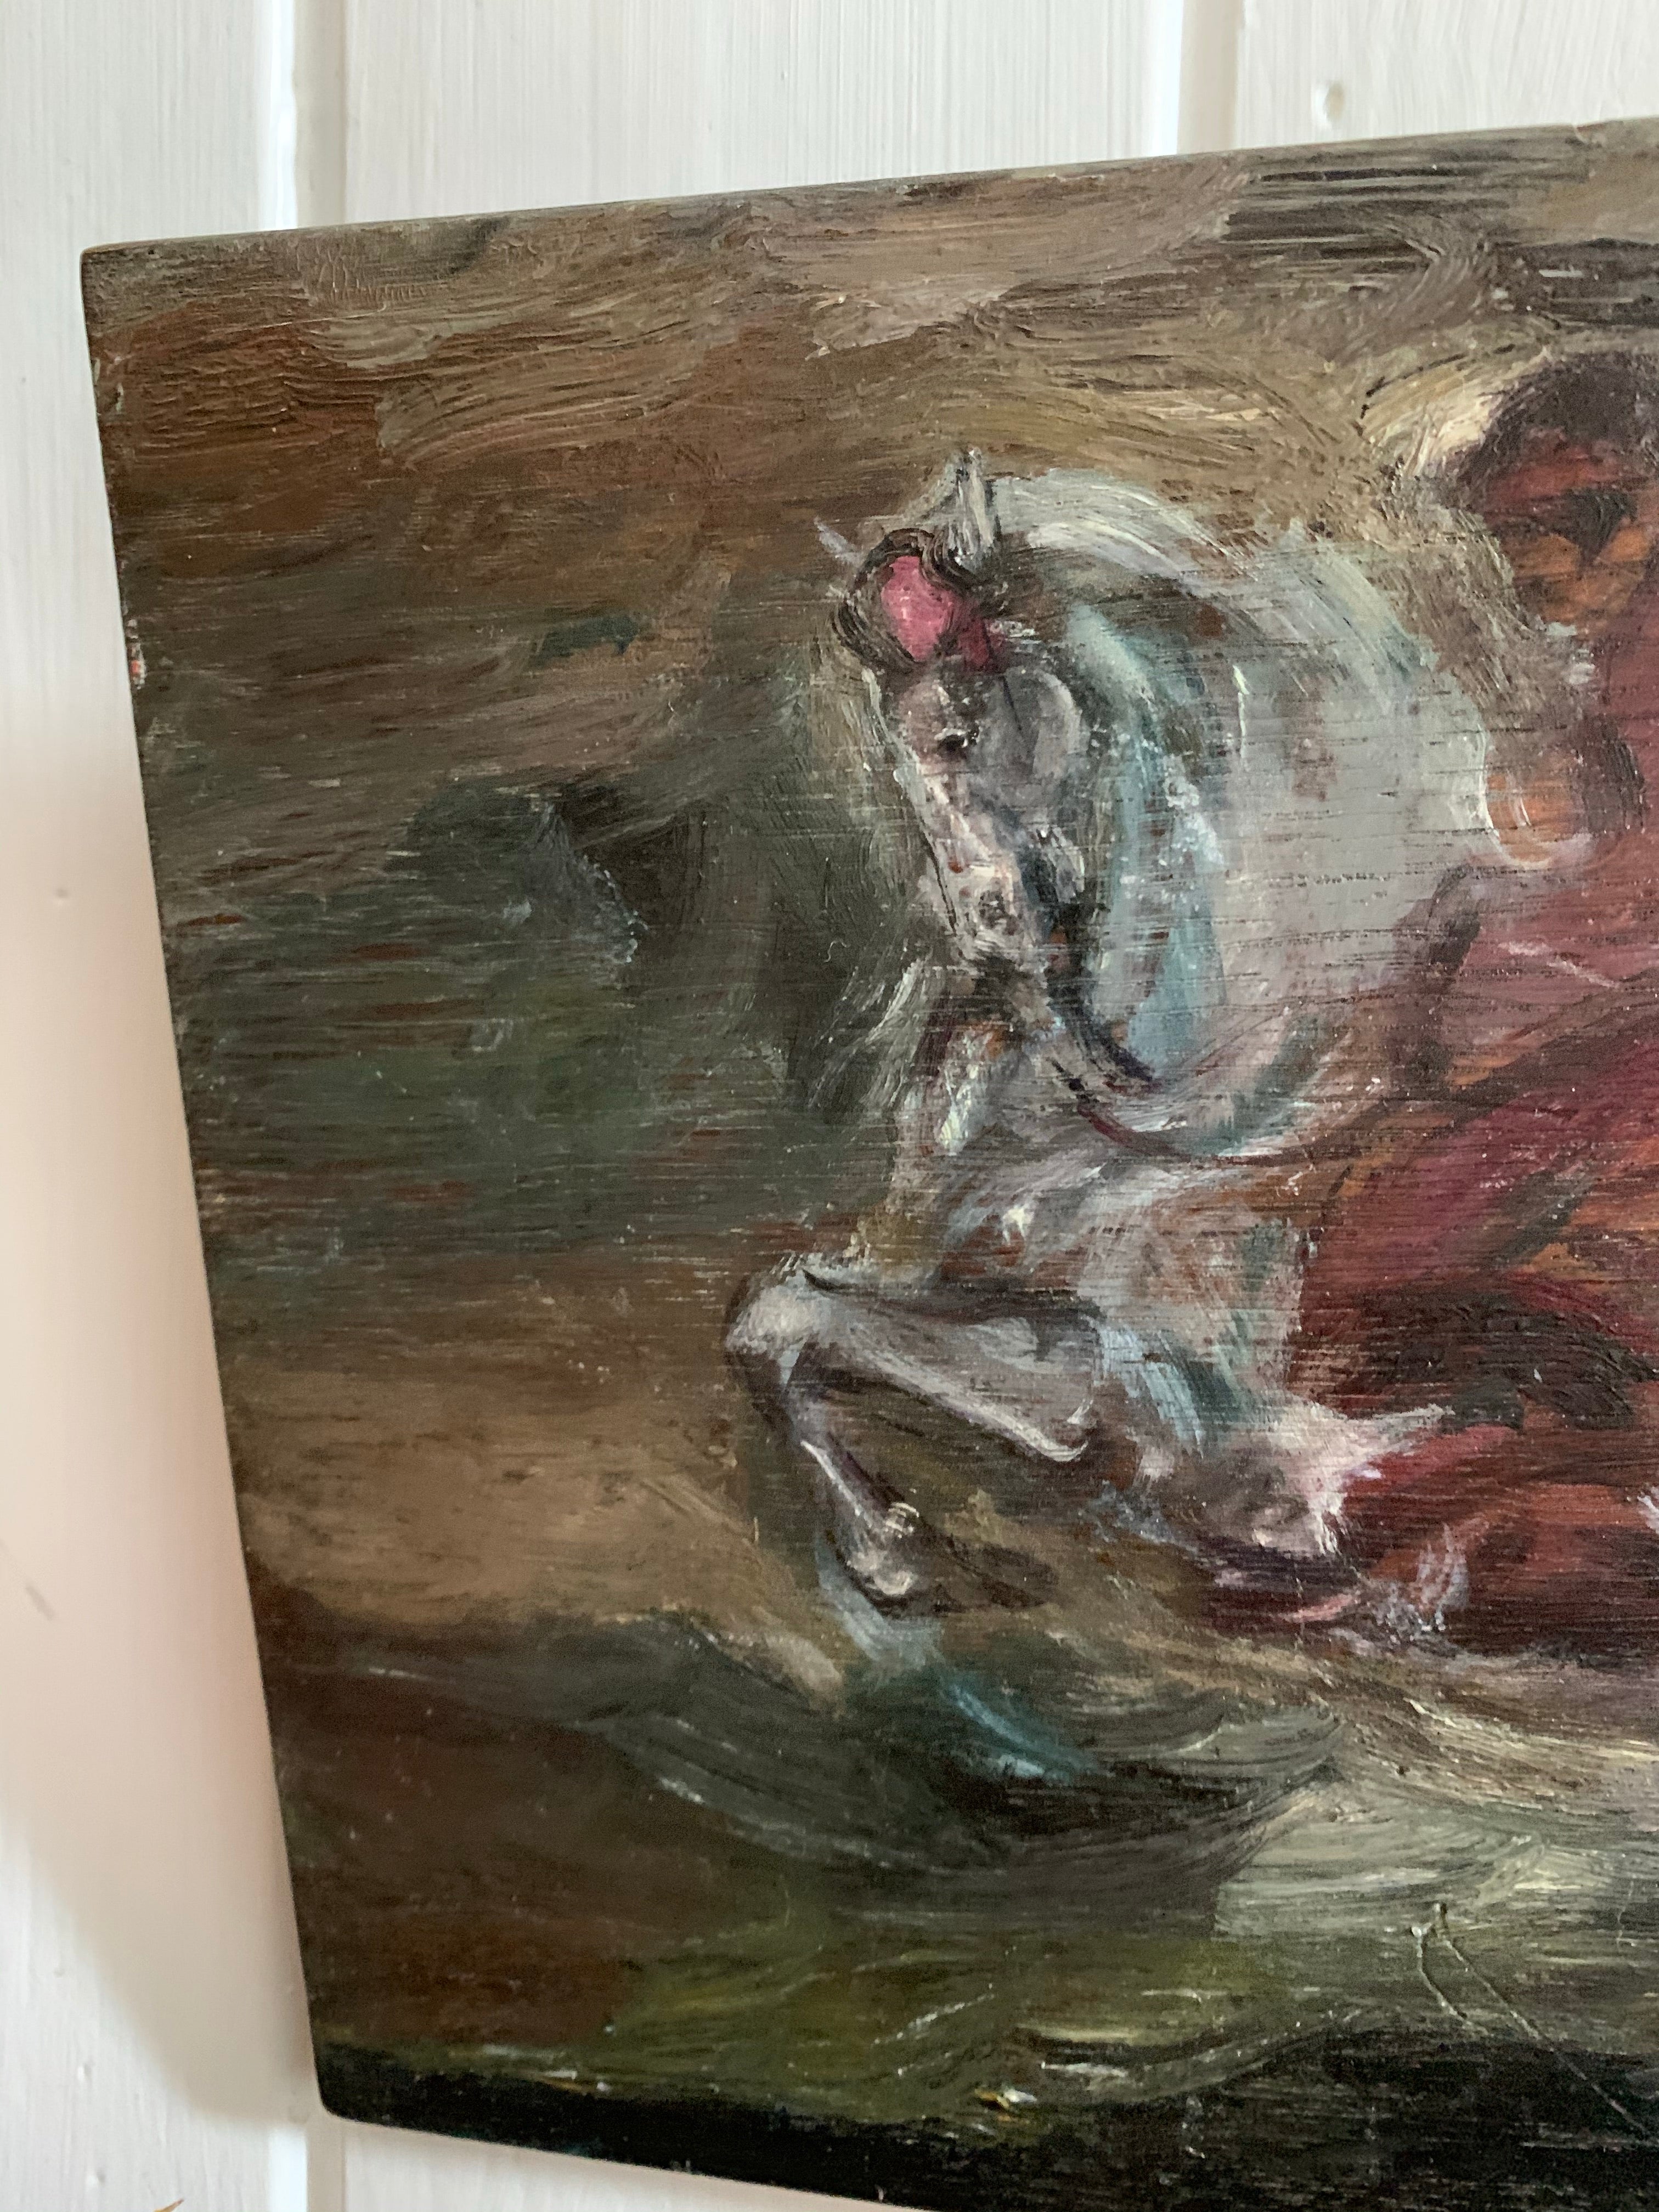 Galloping Horse & Rider: Mini Antique Oil on Wood